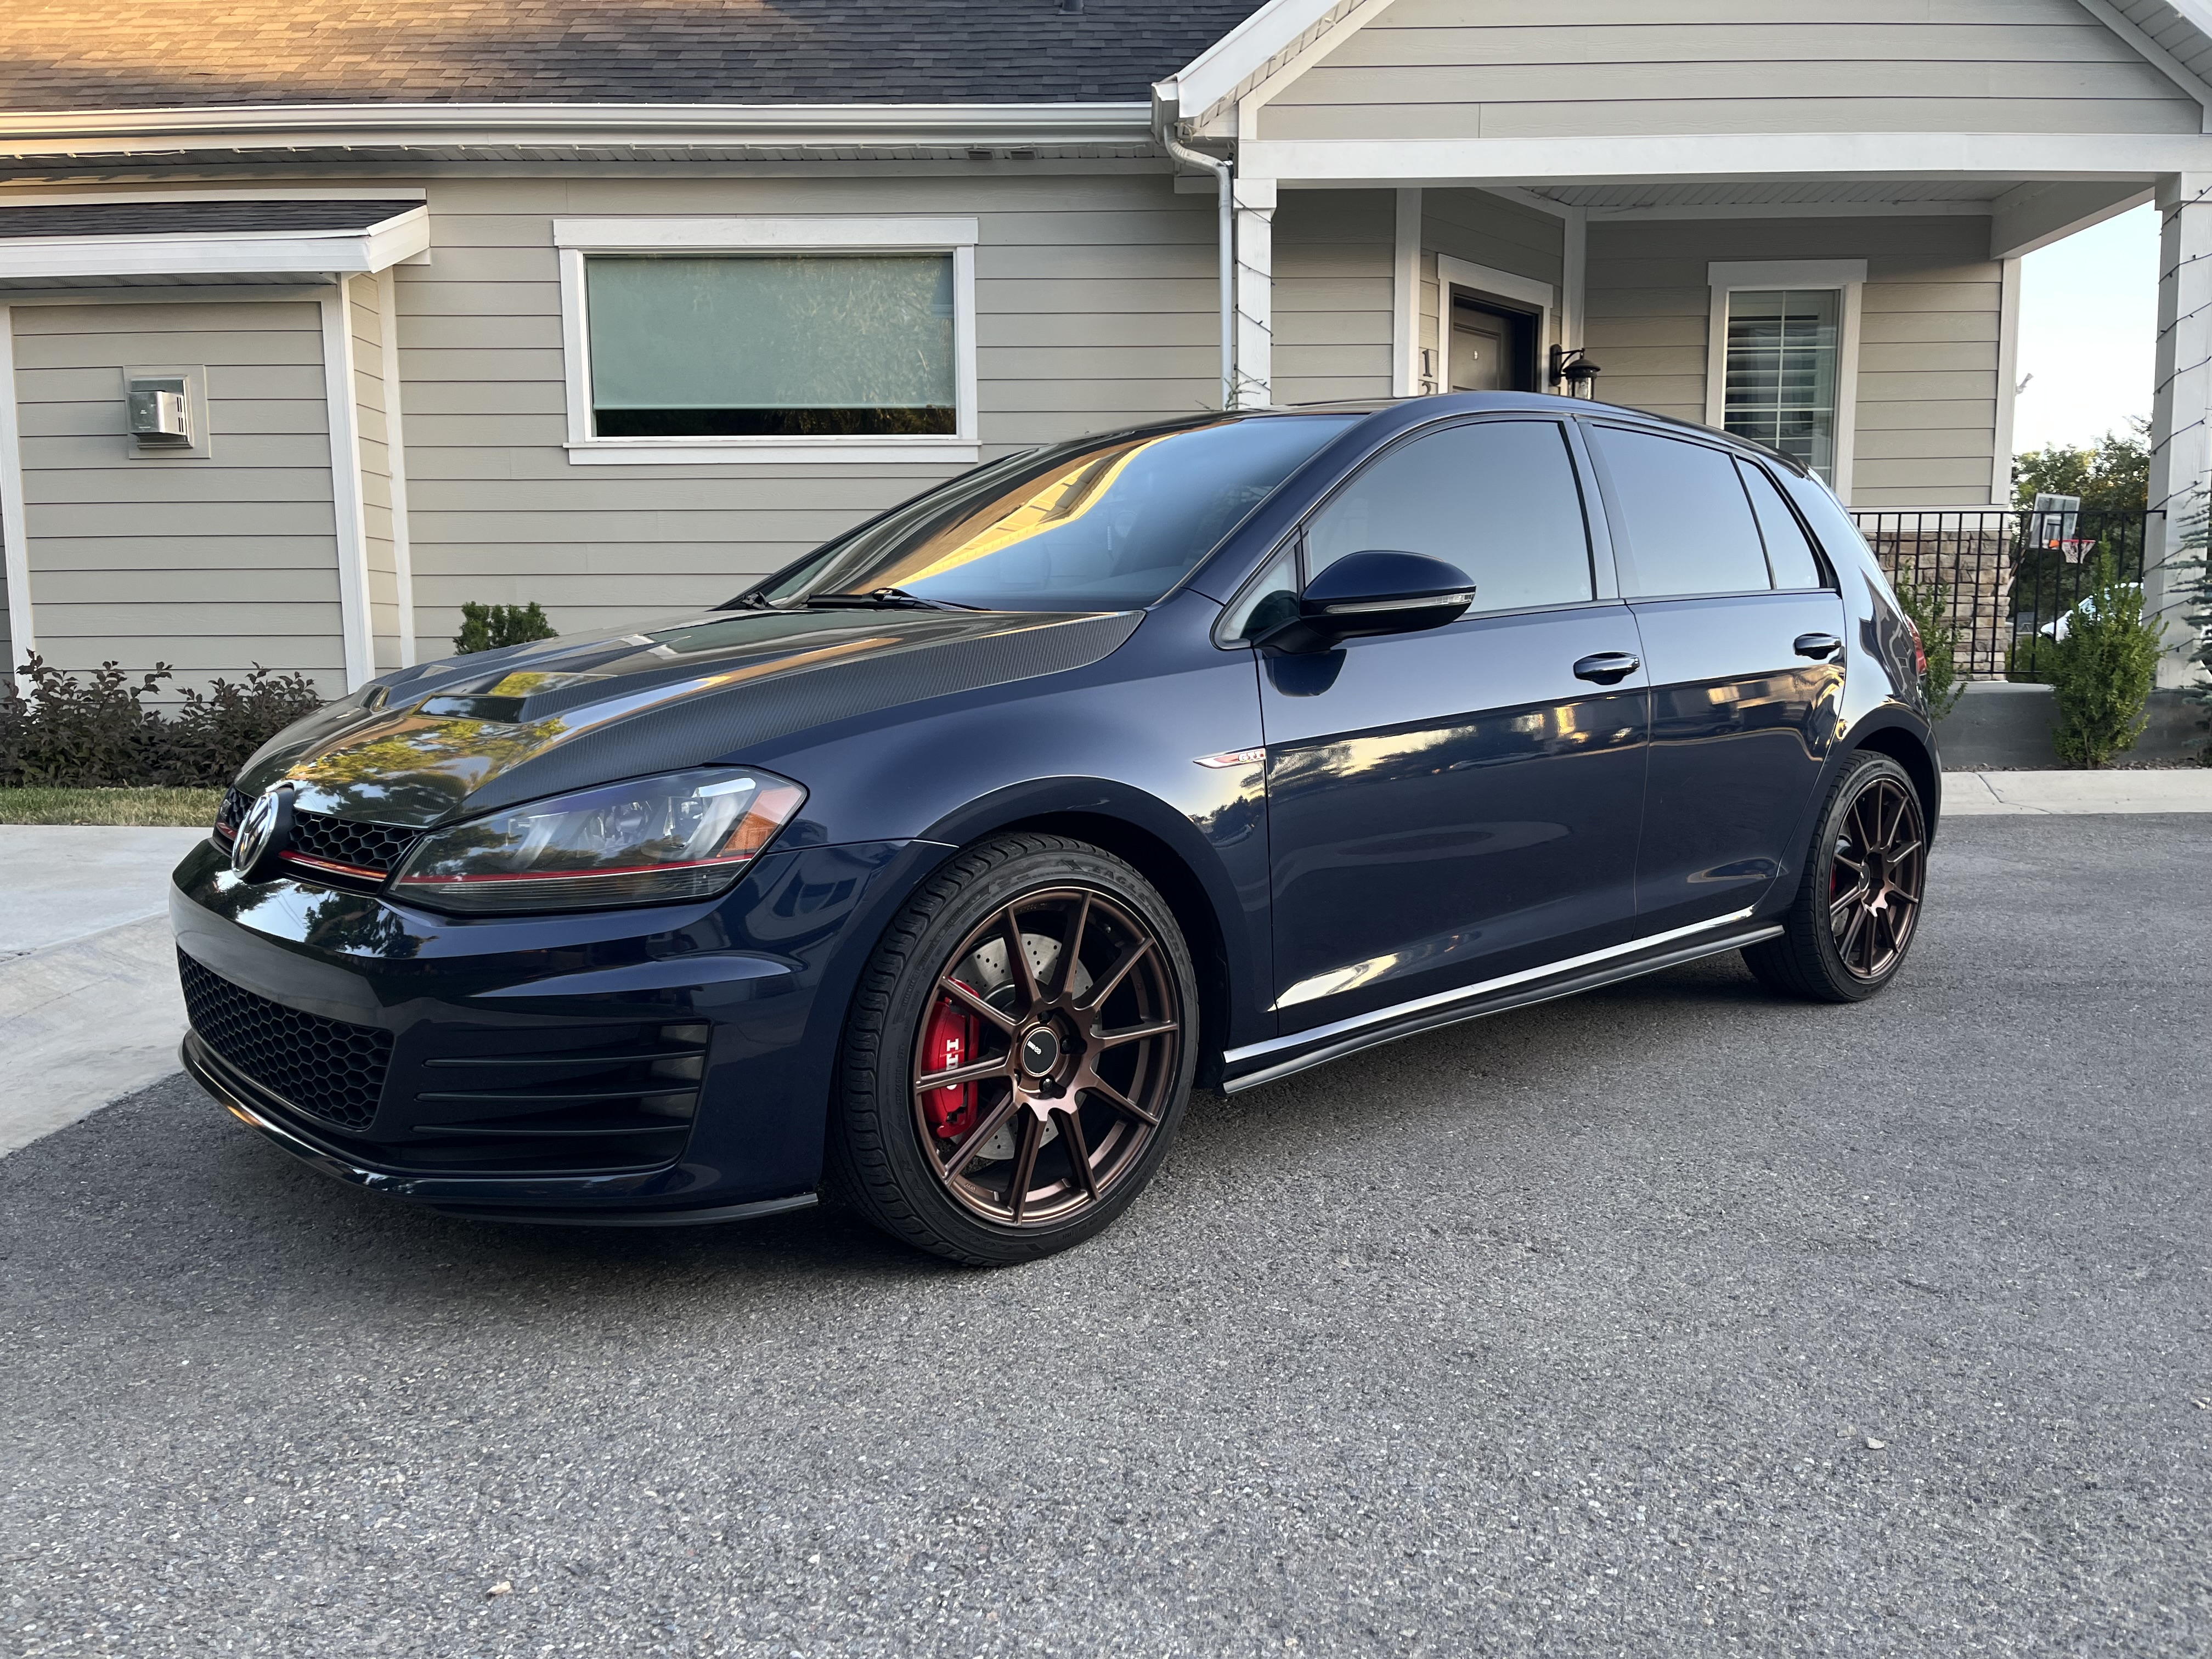 Used 2017 Volkswagen GTI for Sale Right Now - Autotrader